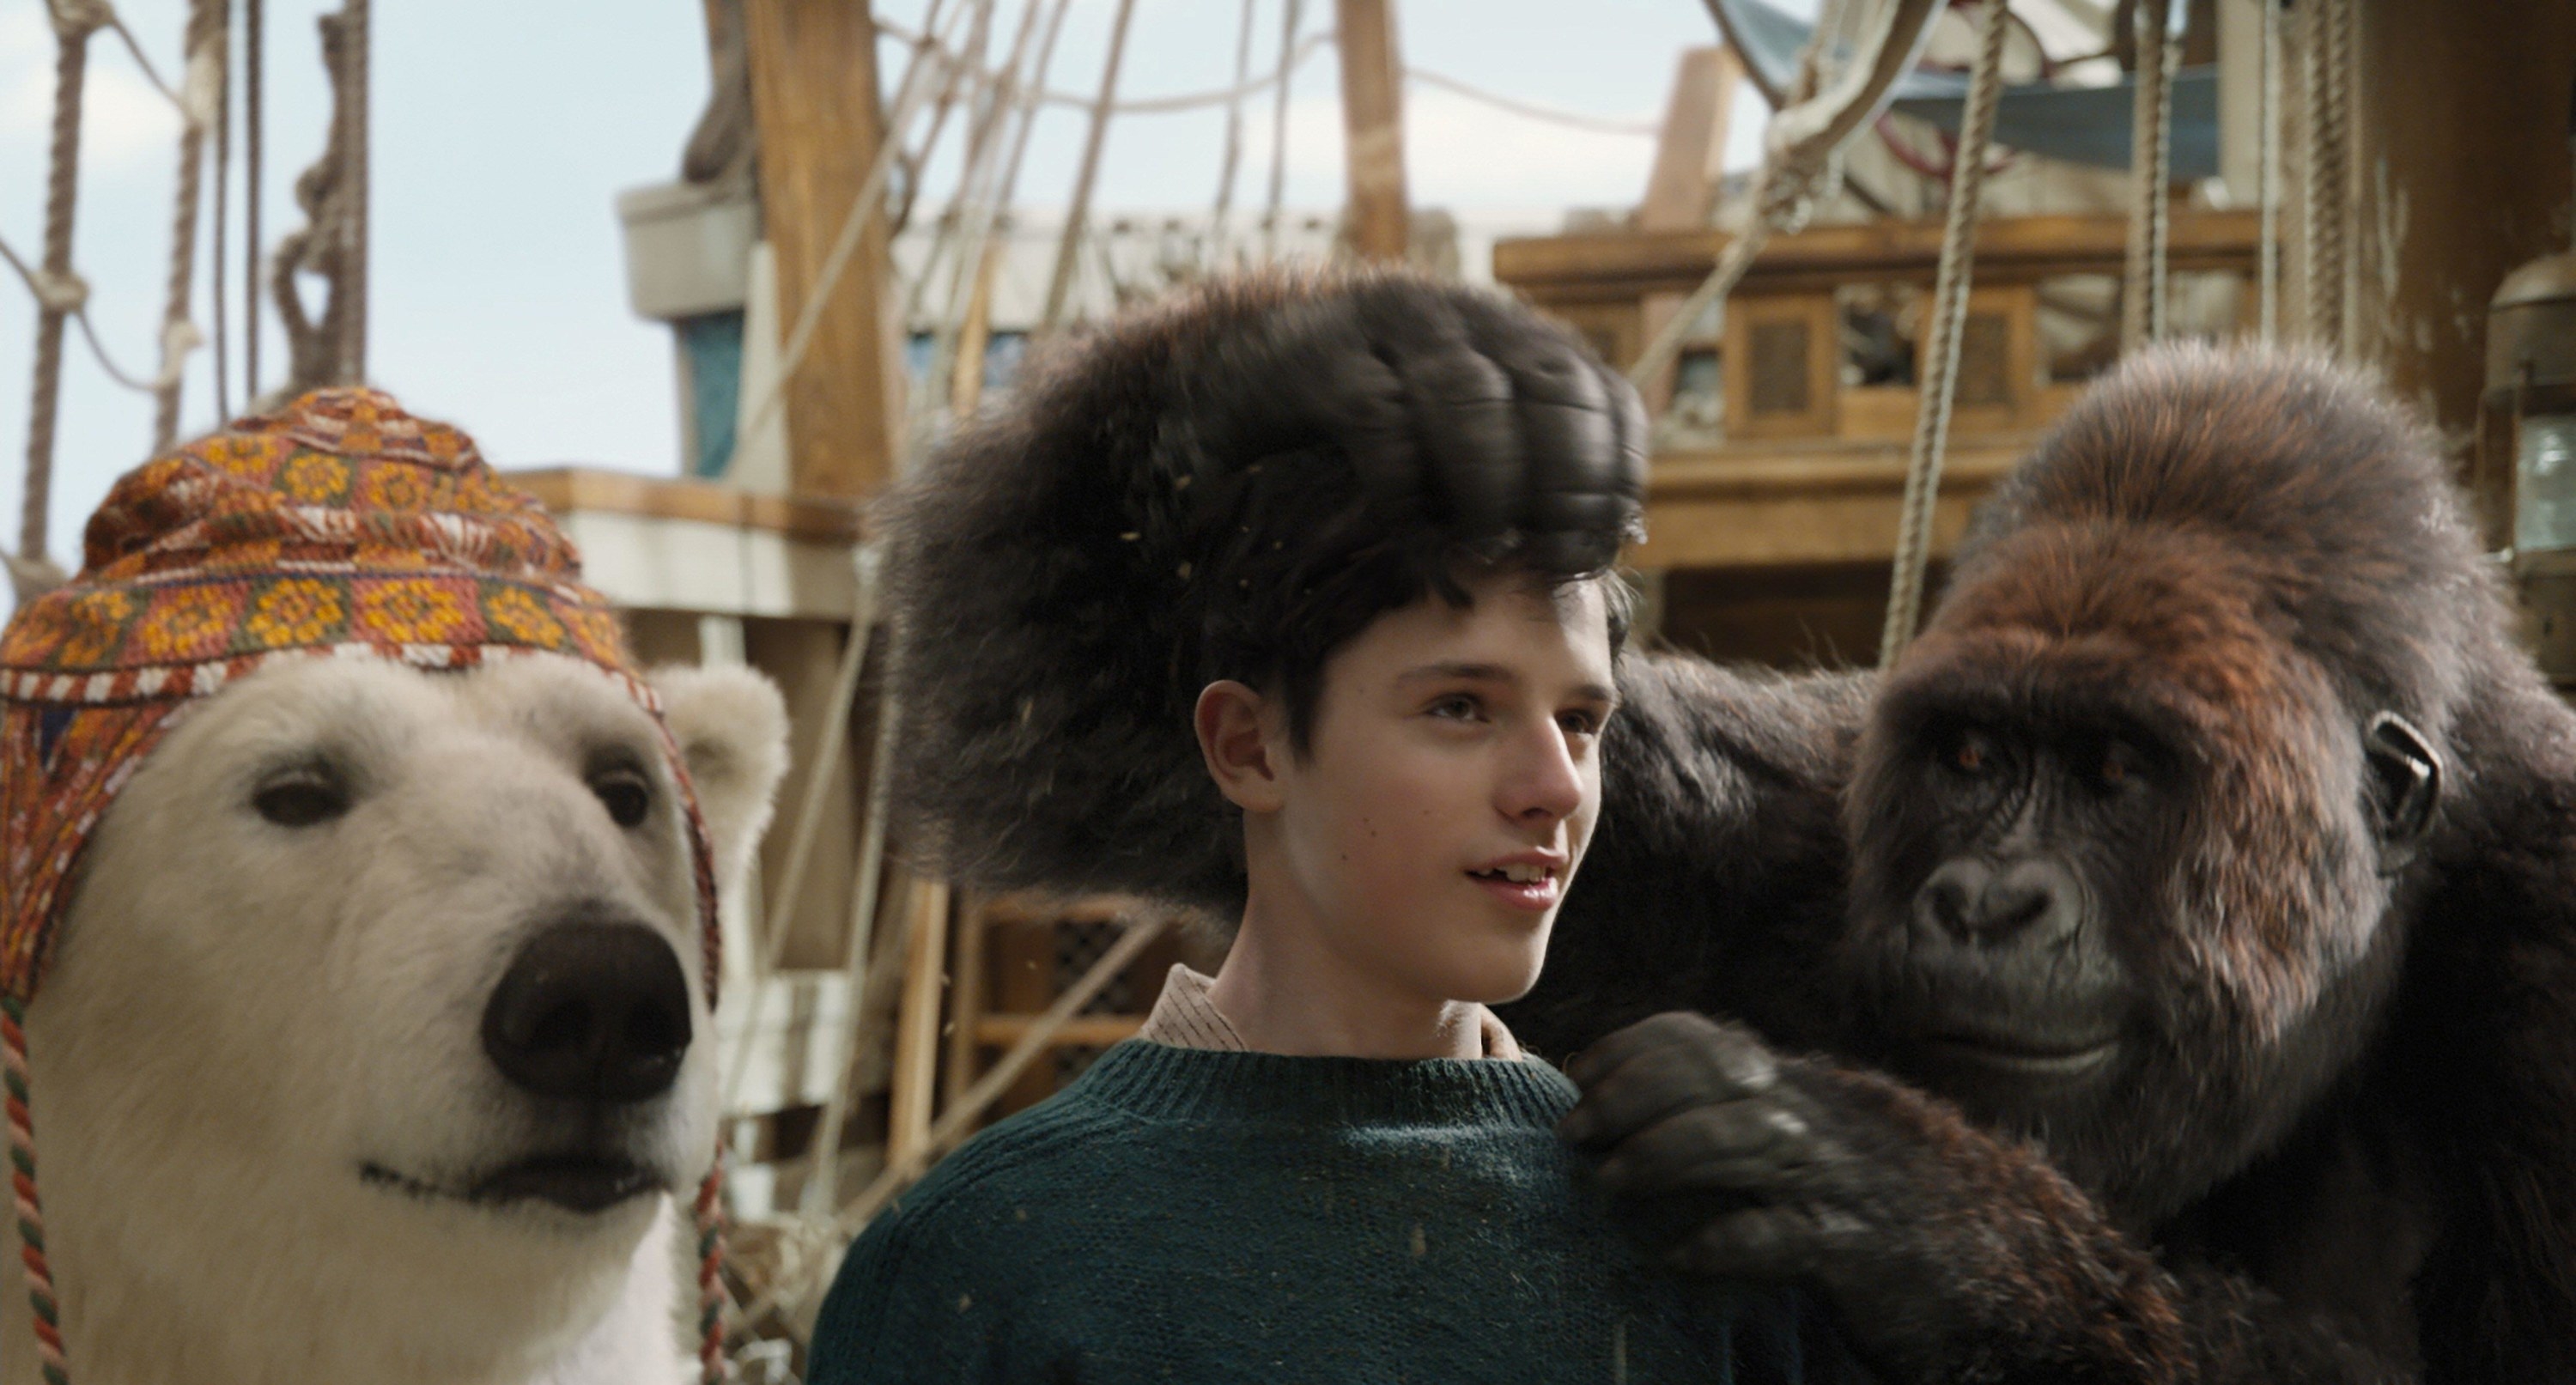 A young boy is comforted on a galleon by a gorilla and a polar bear in a hat